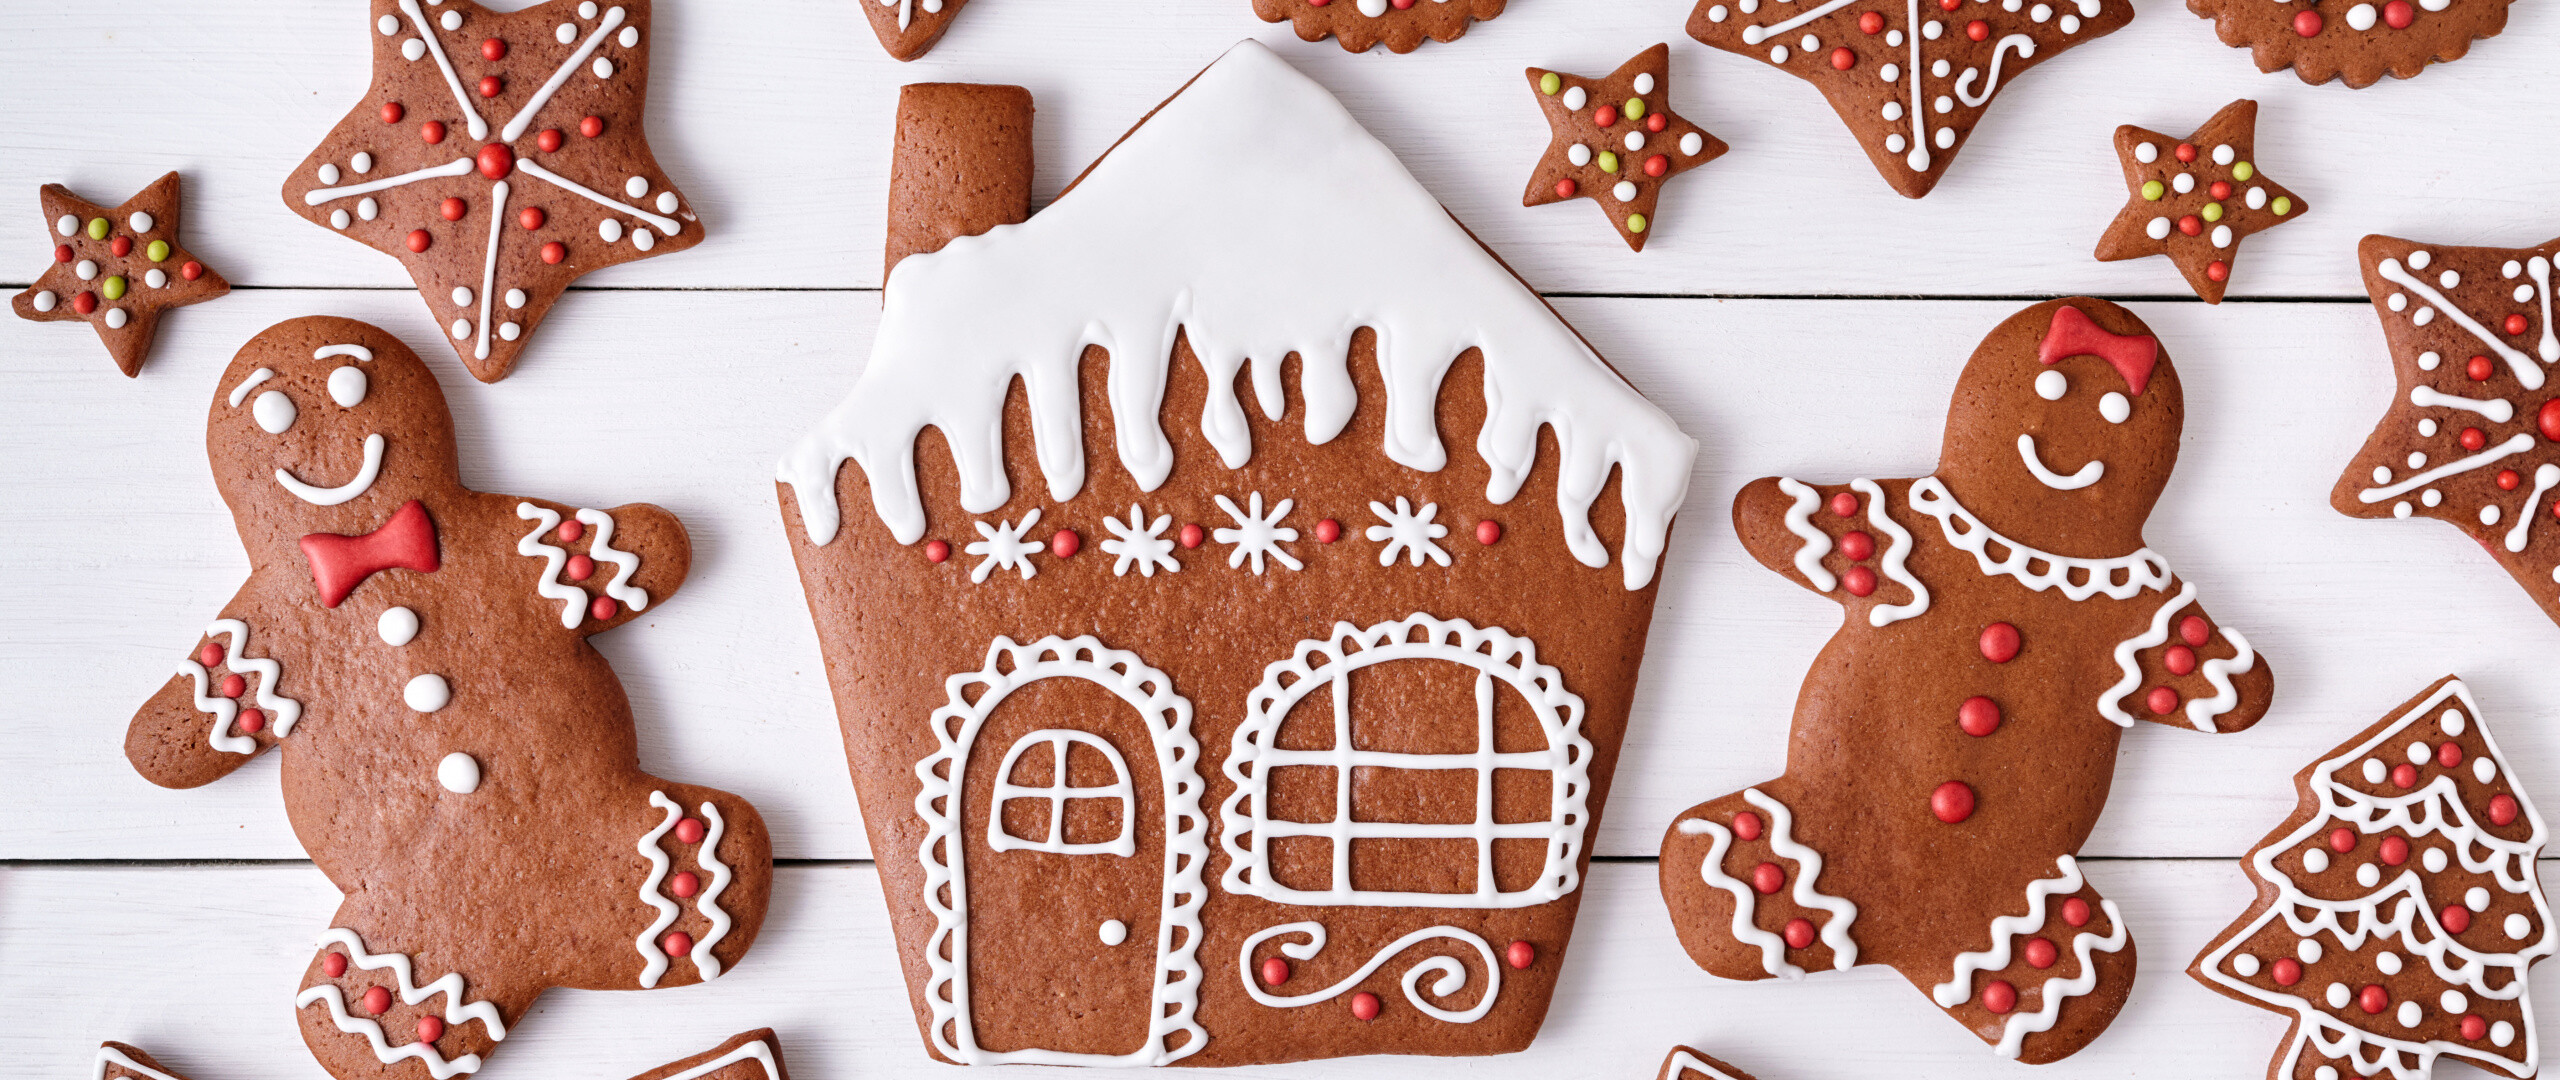 Gingerbread House: Fresh-baked hand-decorated ginger cookies, Elaborate ornaments, Christmas bakery. 2560x1080 Dual Screen Background.